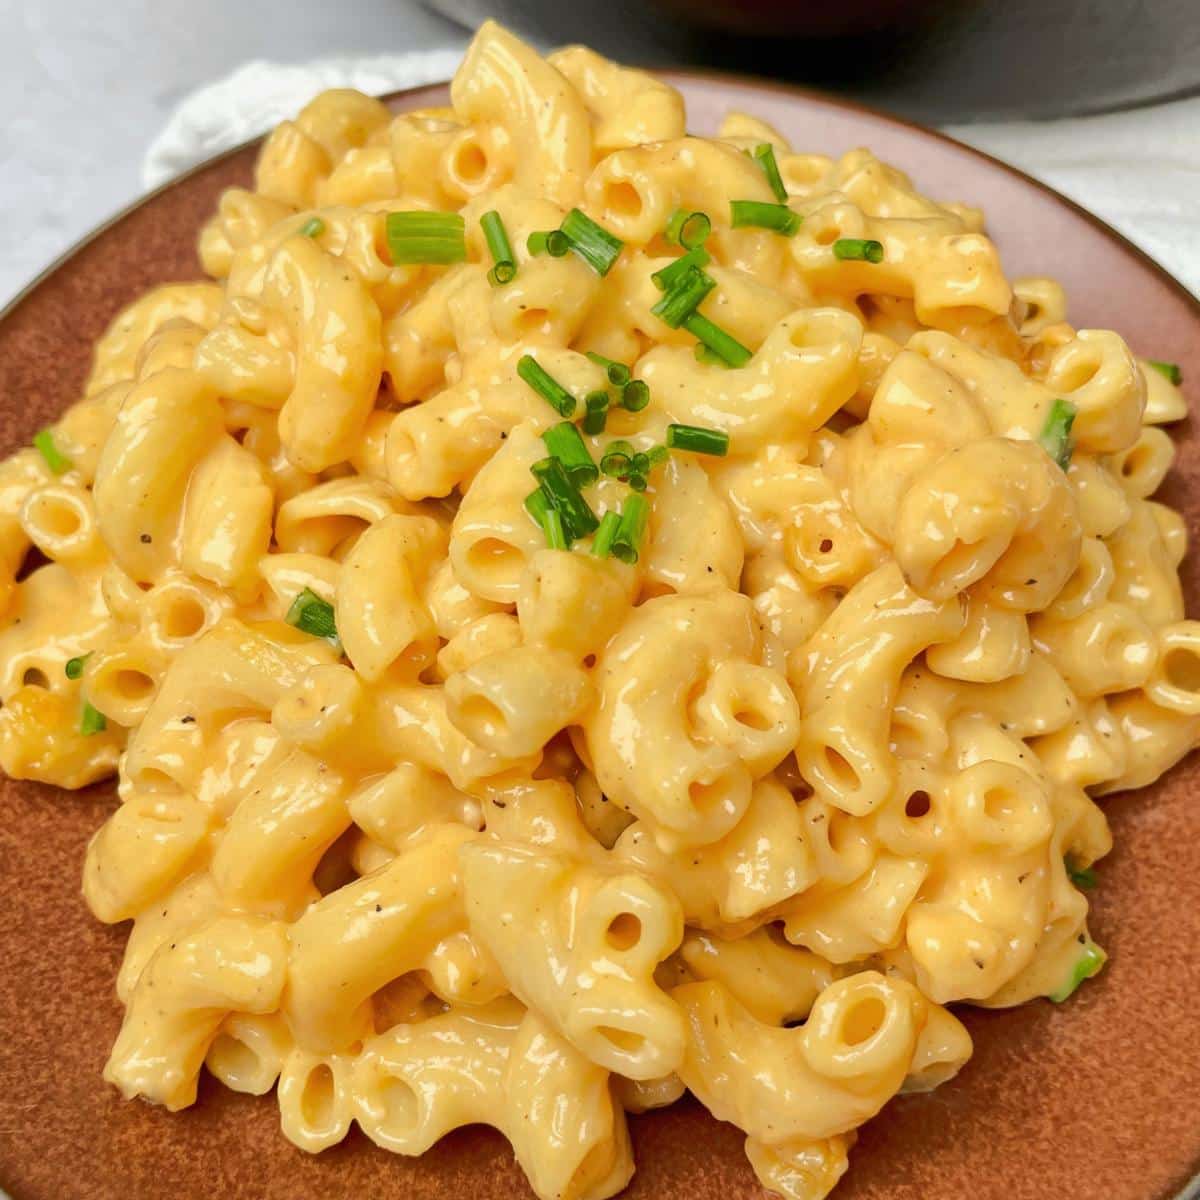 A plate with vegan macaroni and cheese.